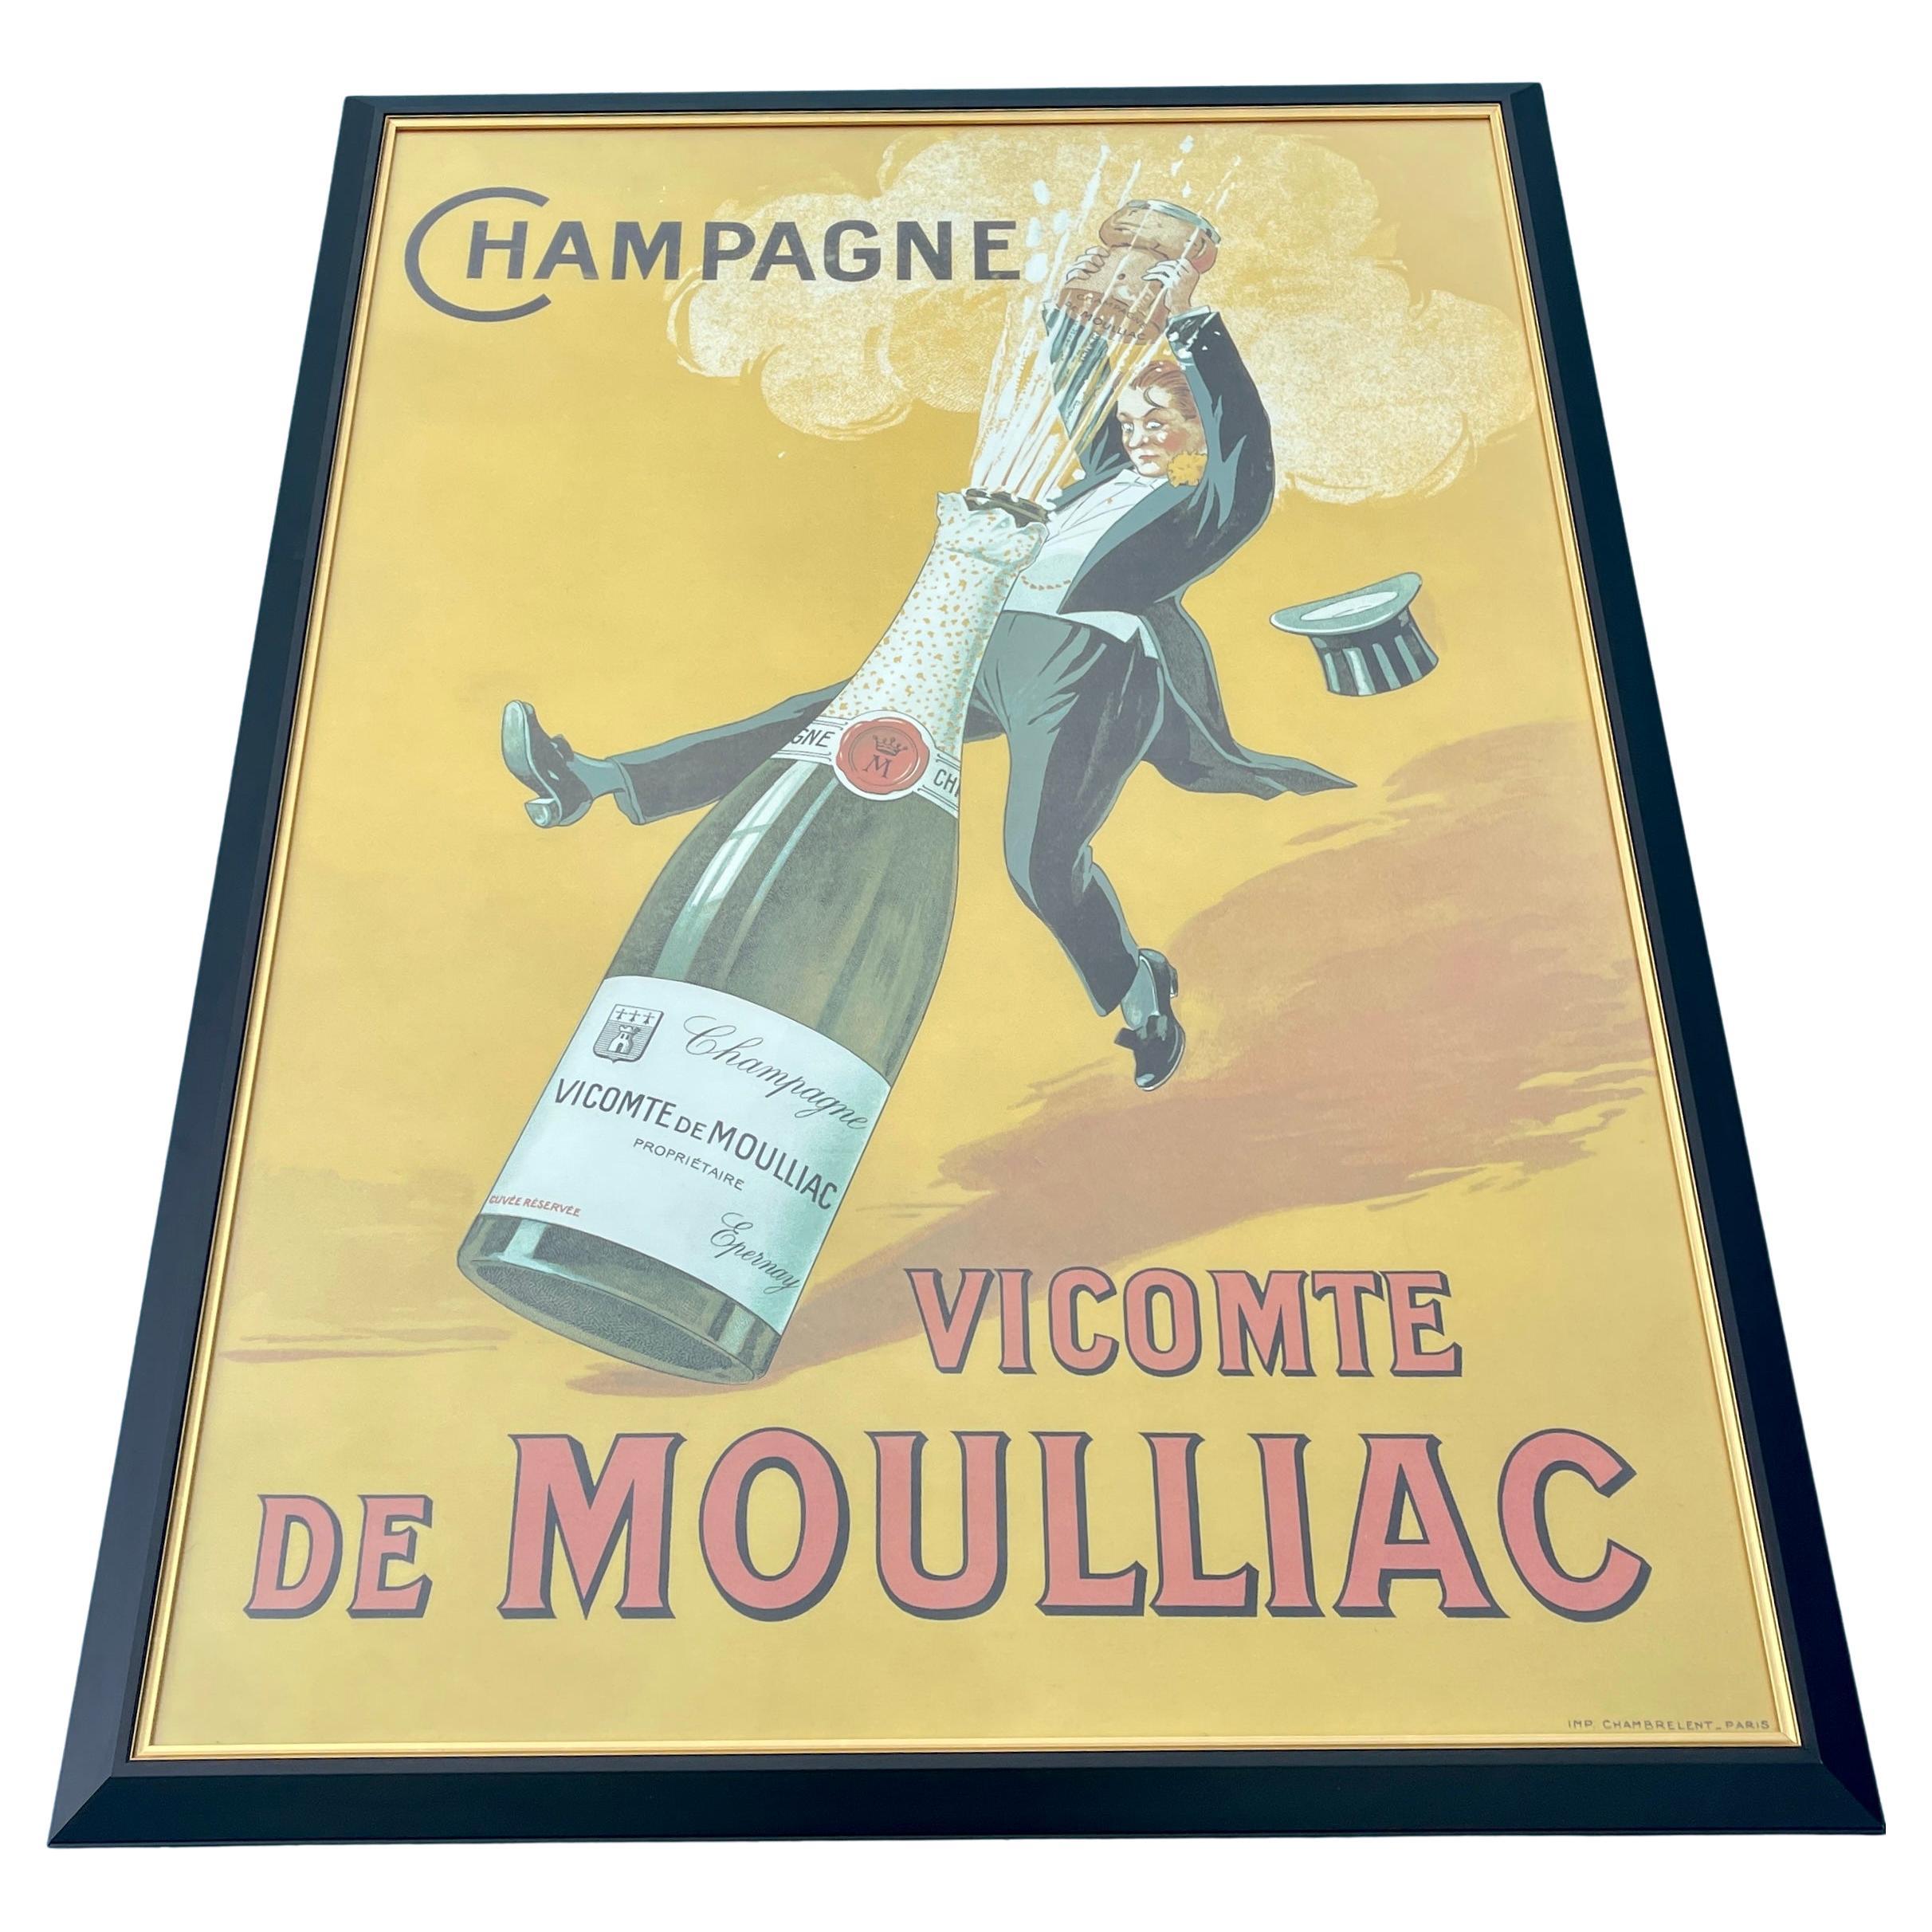 This Vicomte de Moulliac Champagne Poster Was Printed and Framed in the 1980's.

This framed poster is an authentic vintage poster. This item is custom double- framed in matte black and gilt aluminum and is under an acrylic UV plexiglass, which is